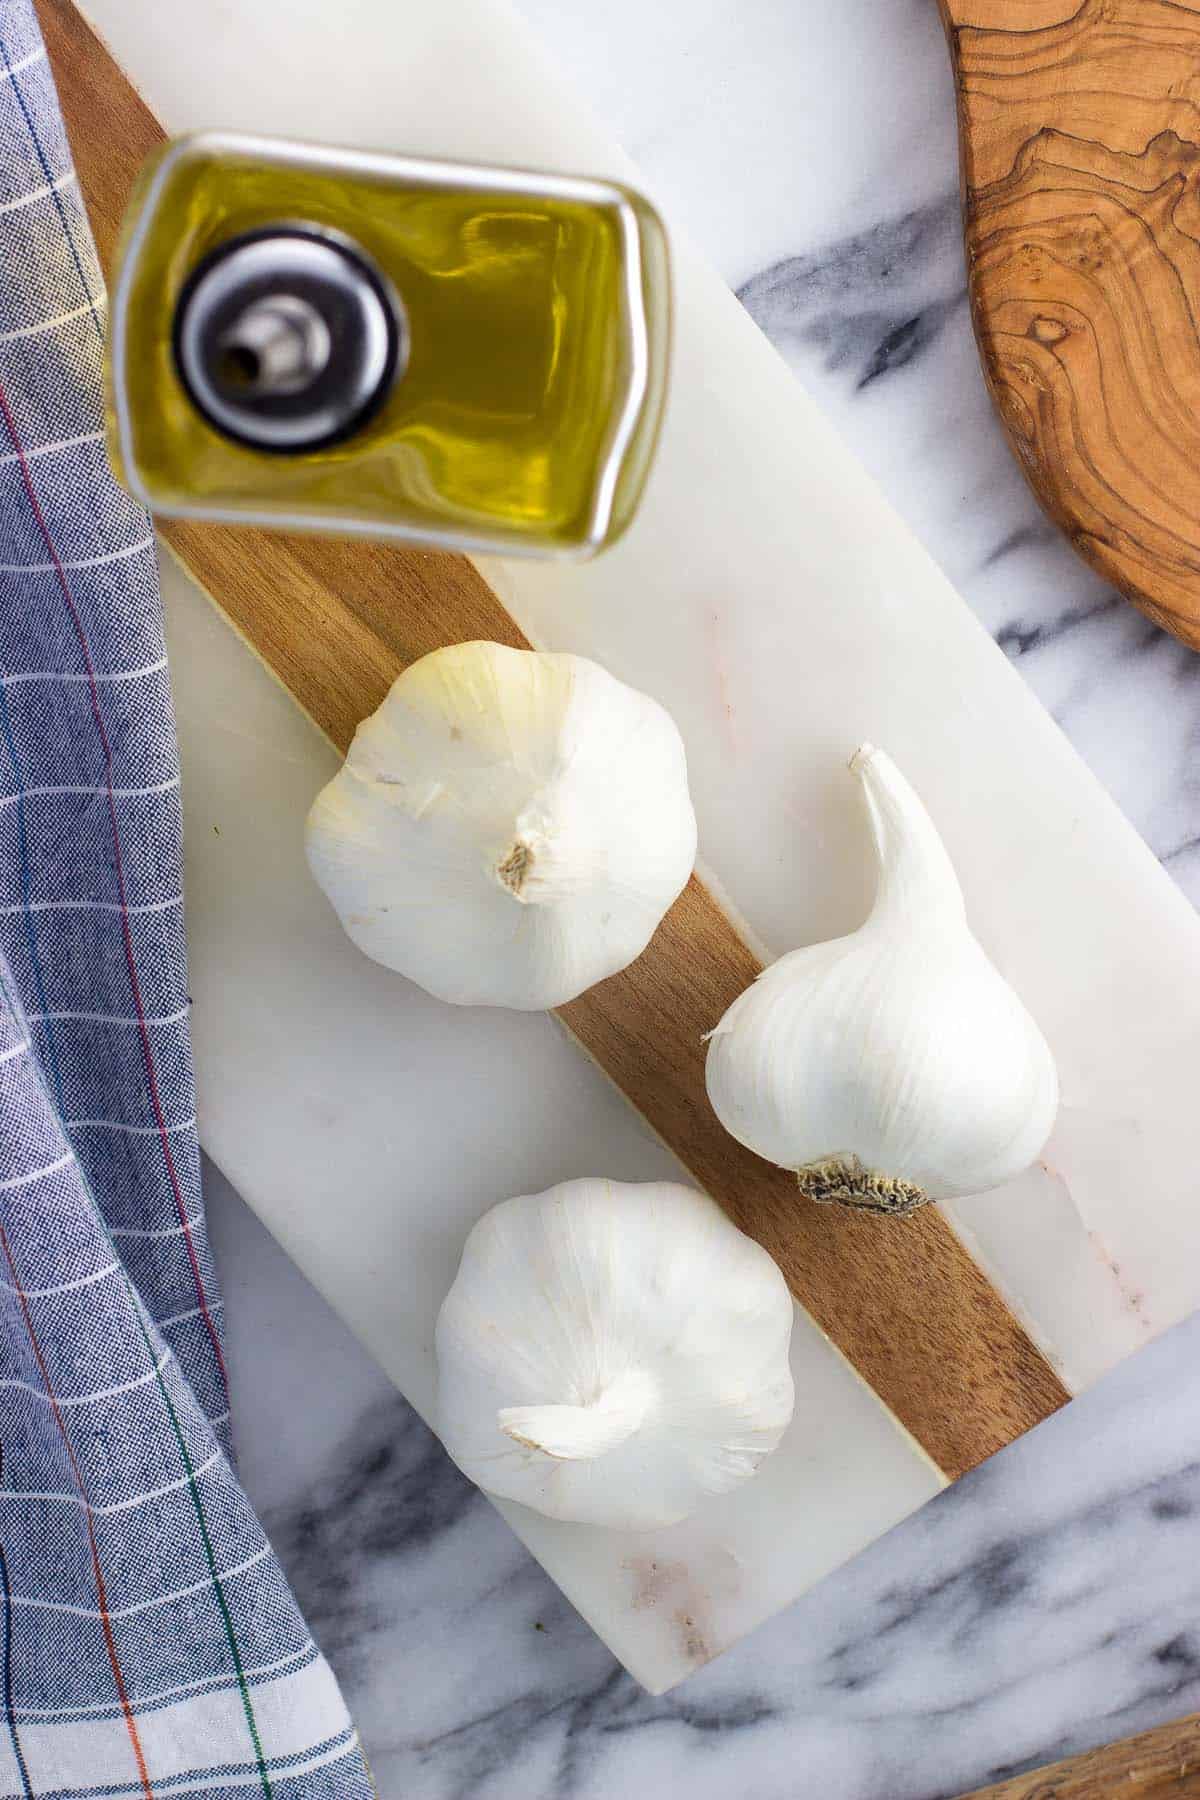 Three heads of garlic and an olive oil dispenser on a board.